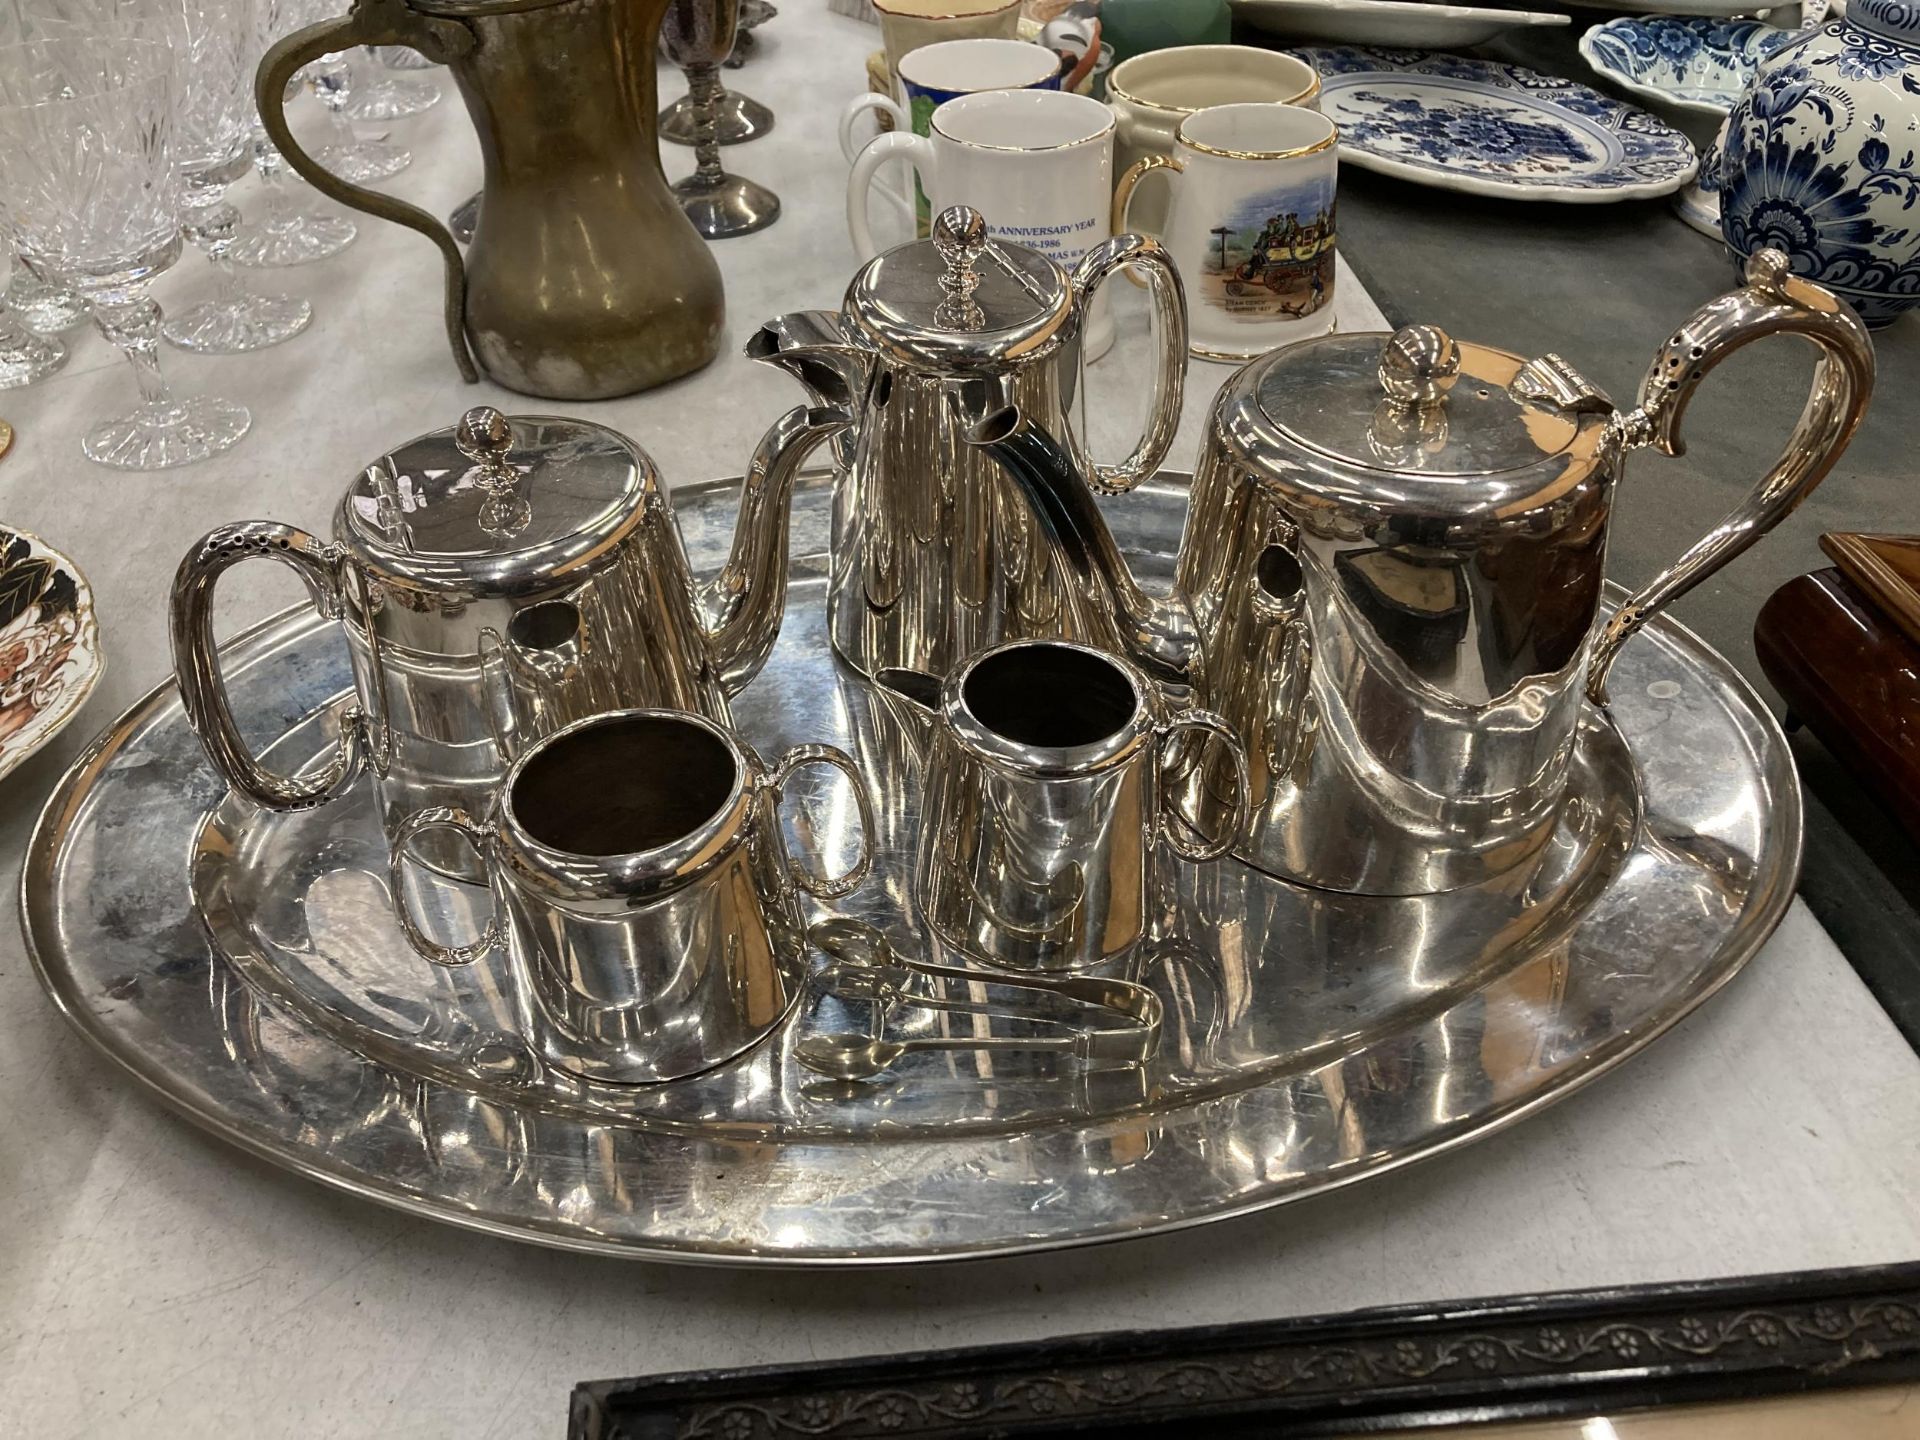 A VINTAGE SILVER PLATED TEA SET AND TRAY - Image 2 of 4